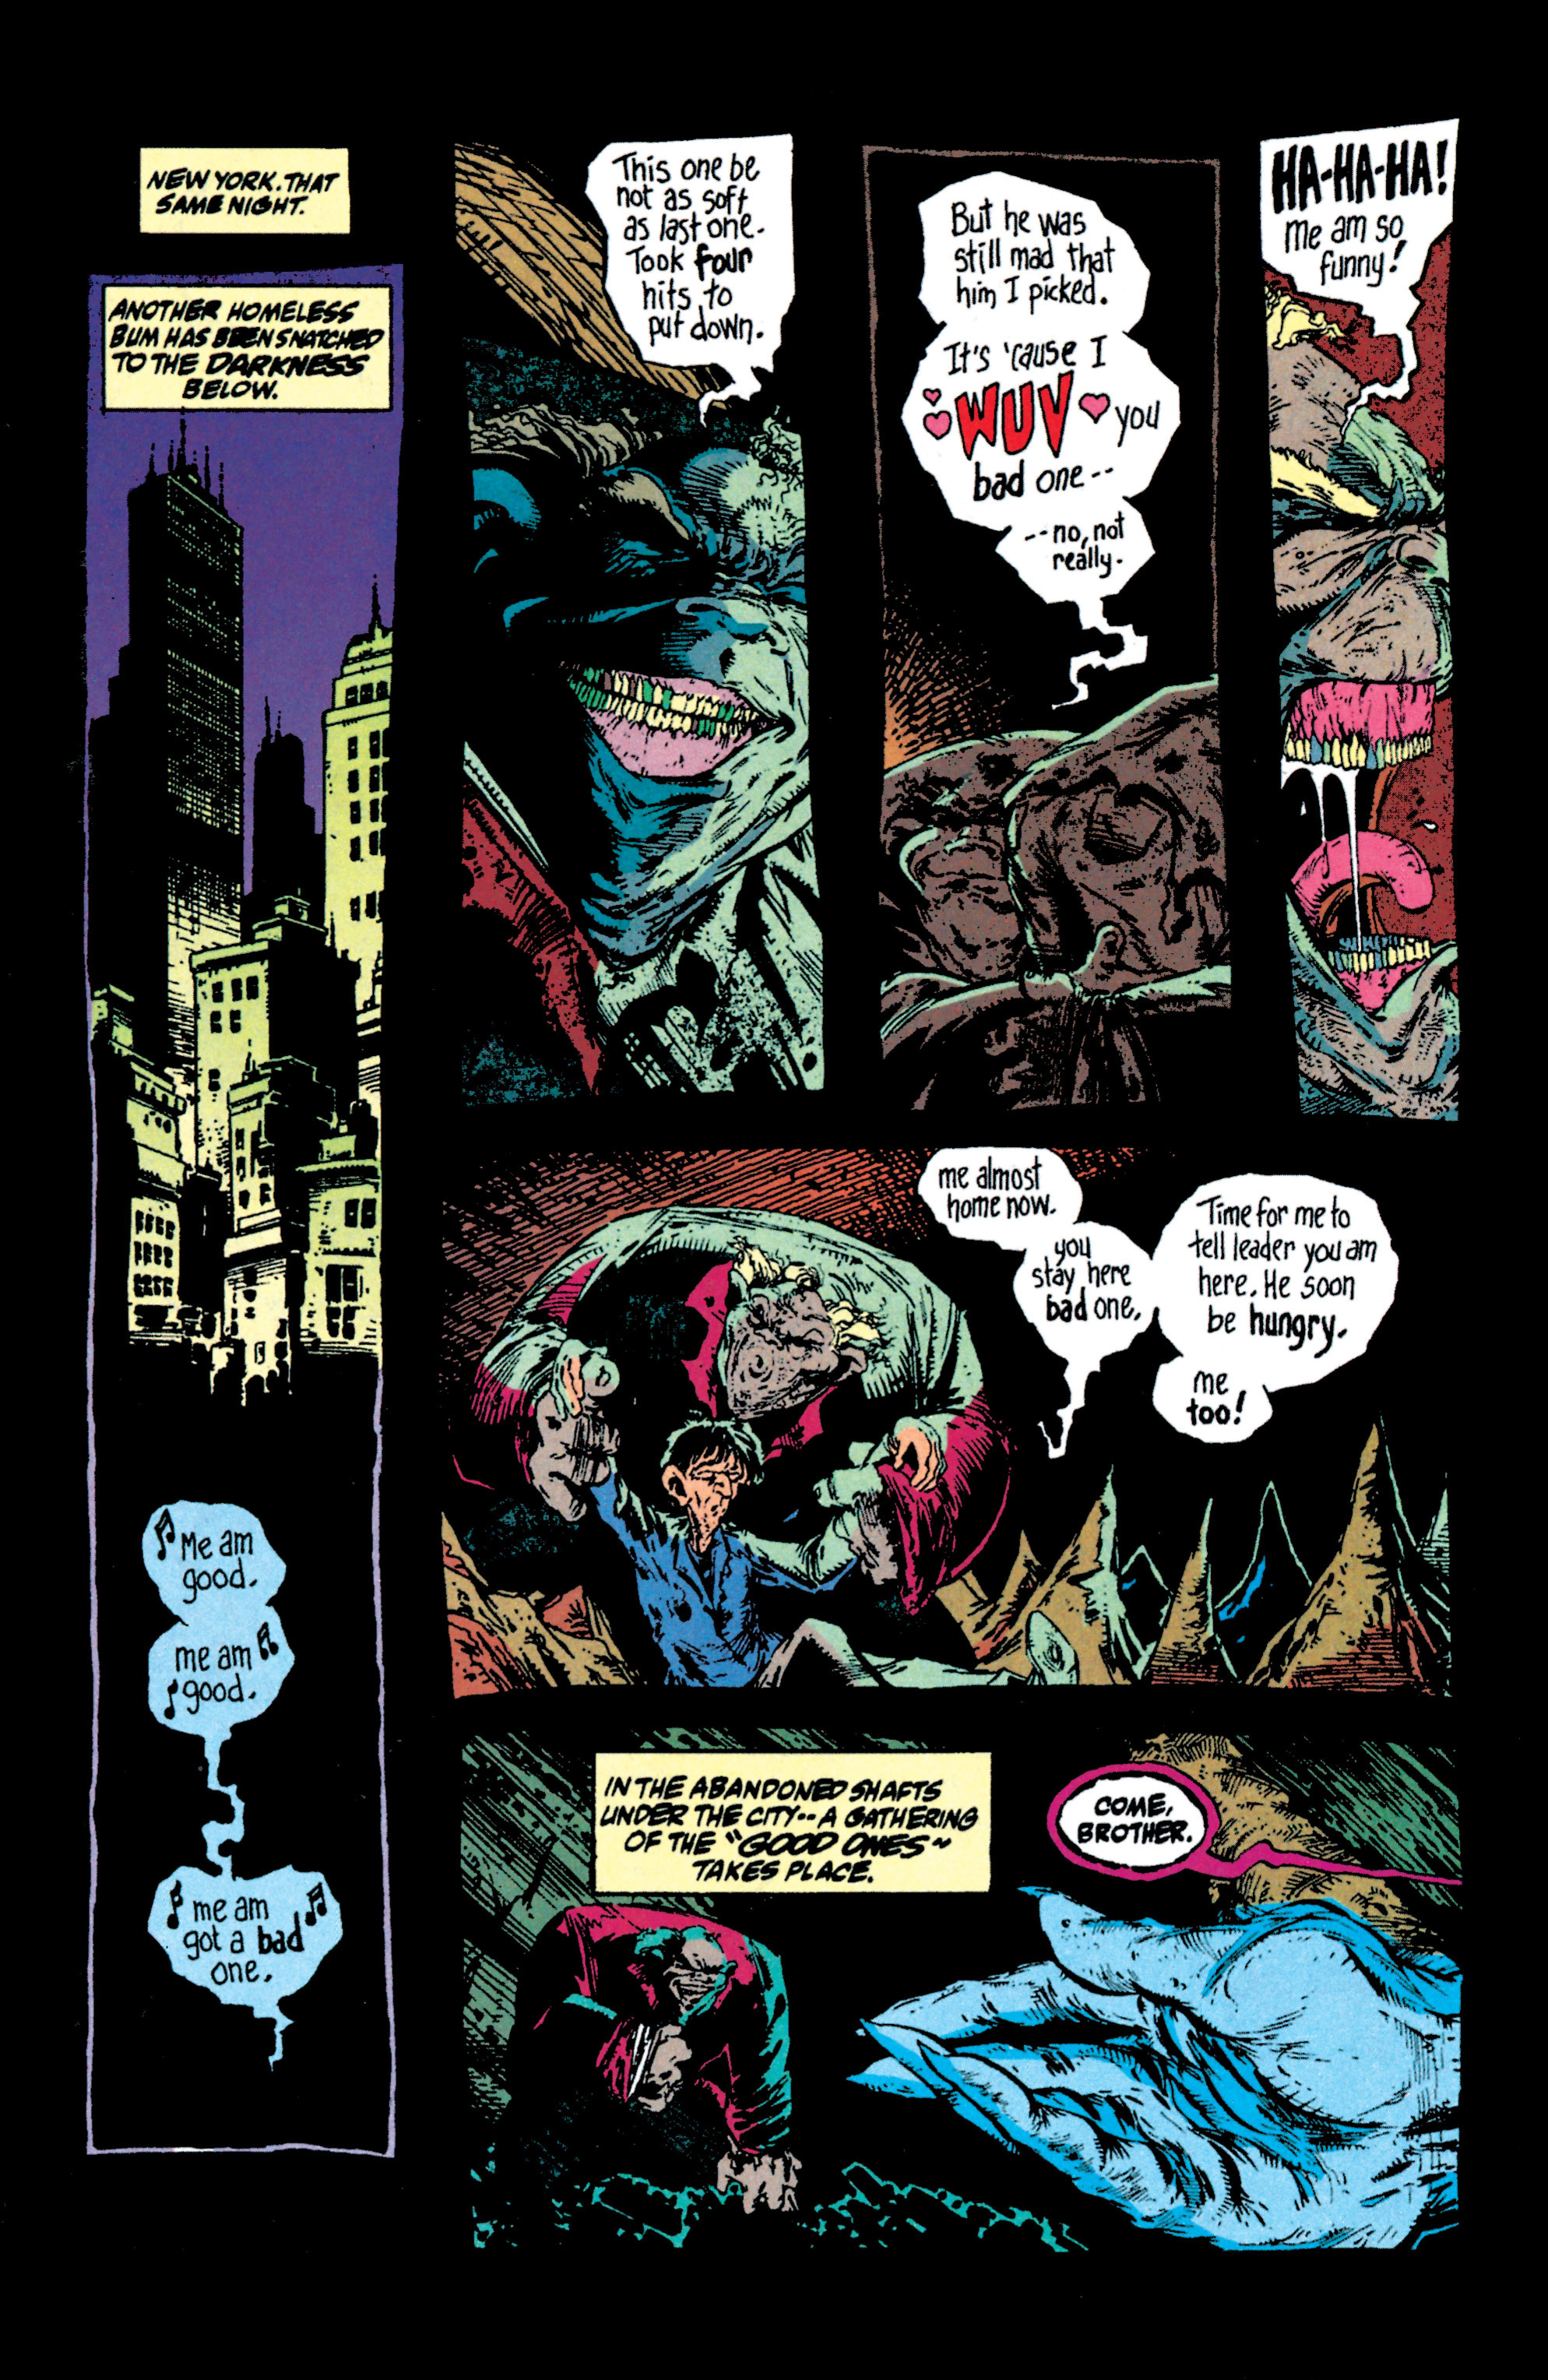 Spider-Man (1990) 13_-_Sub_City_Part_1_of_2 Page 15